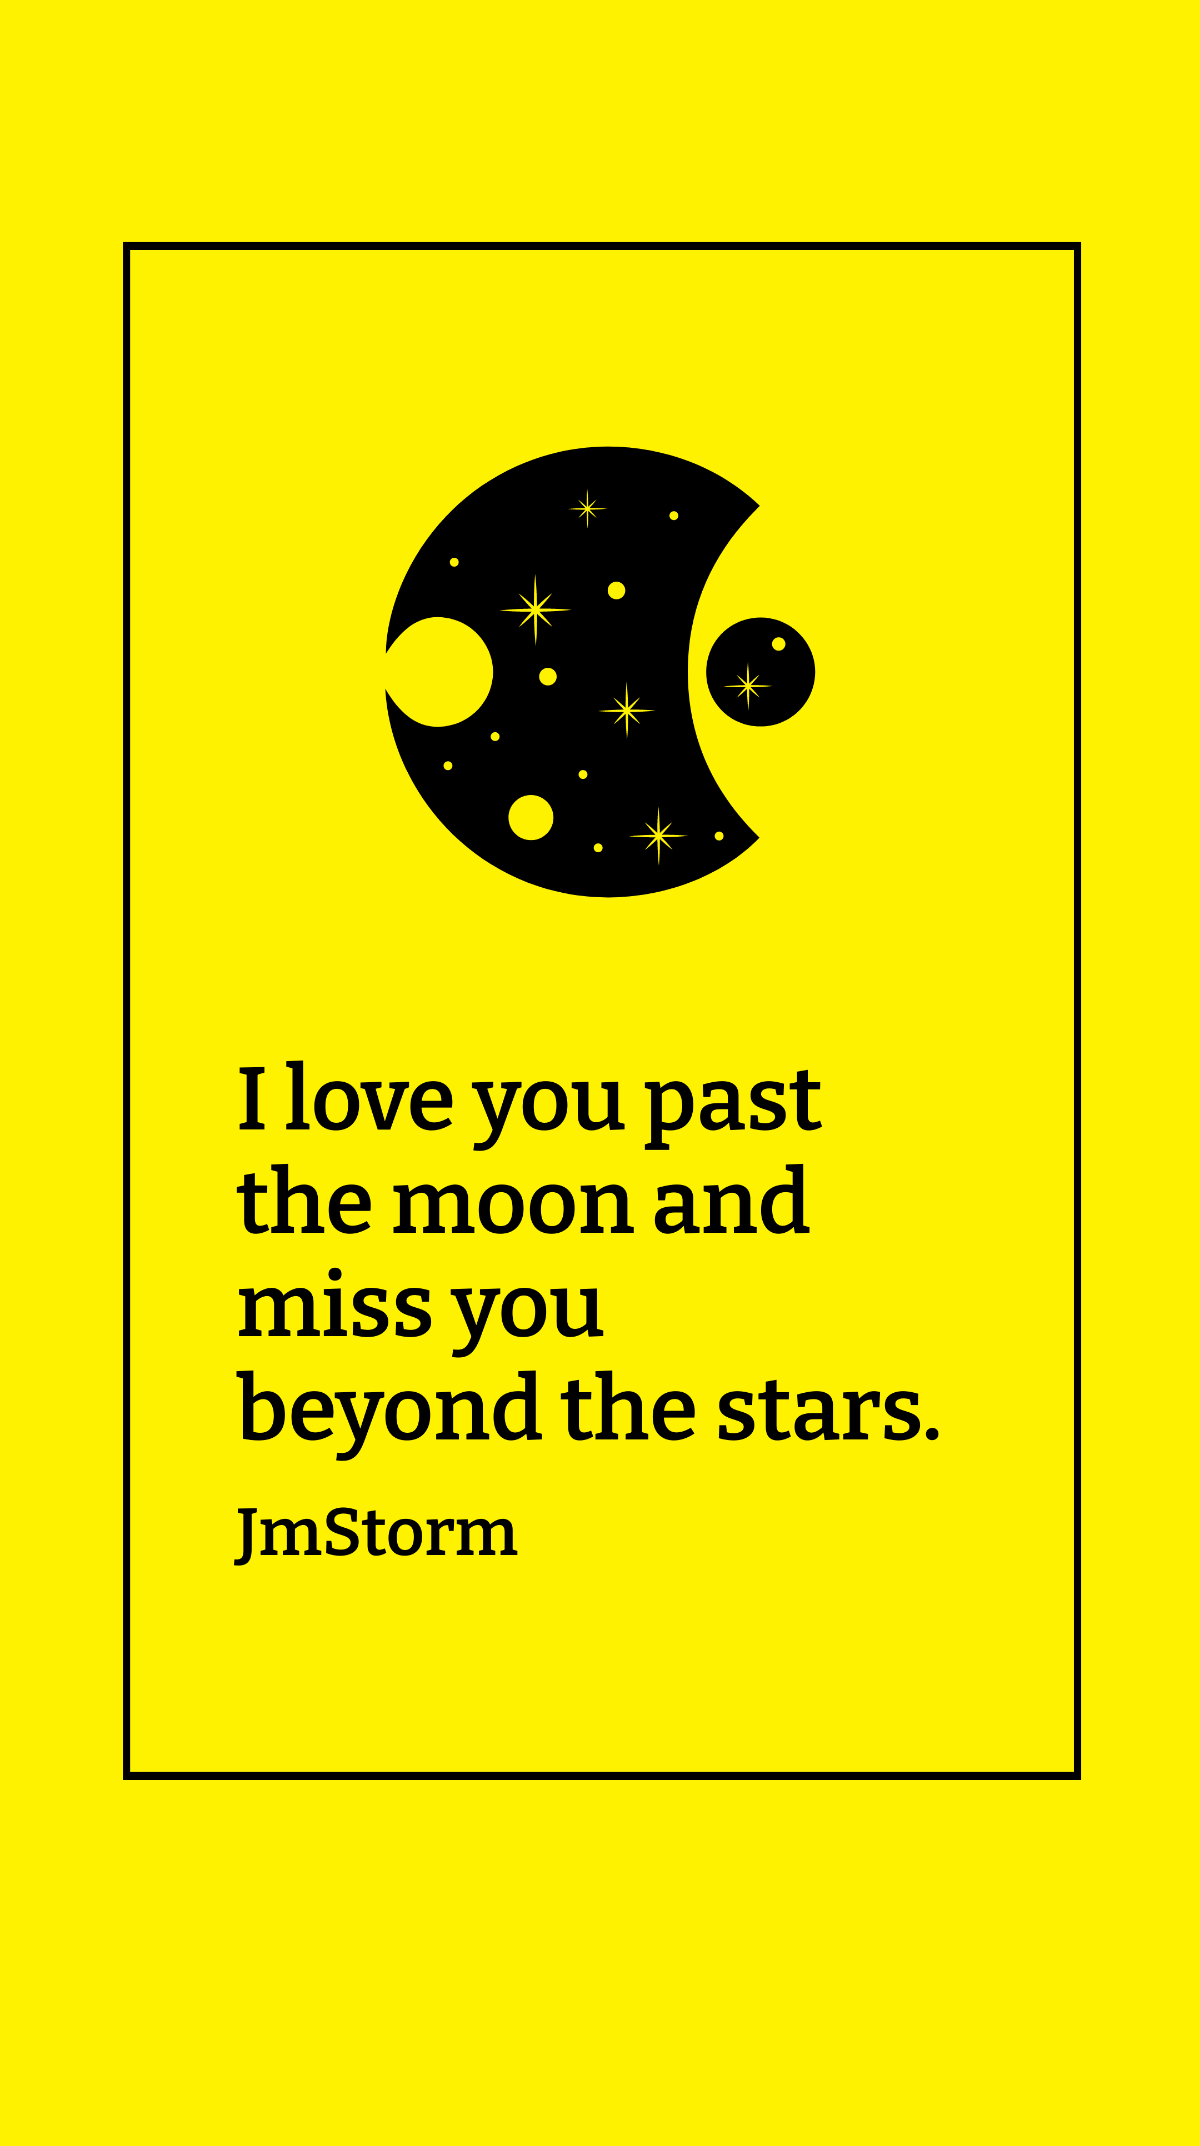 JmStorm - I love you past the moon and miss you beyond the stars. Template